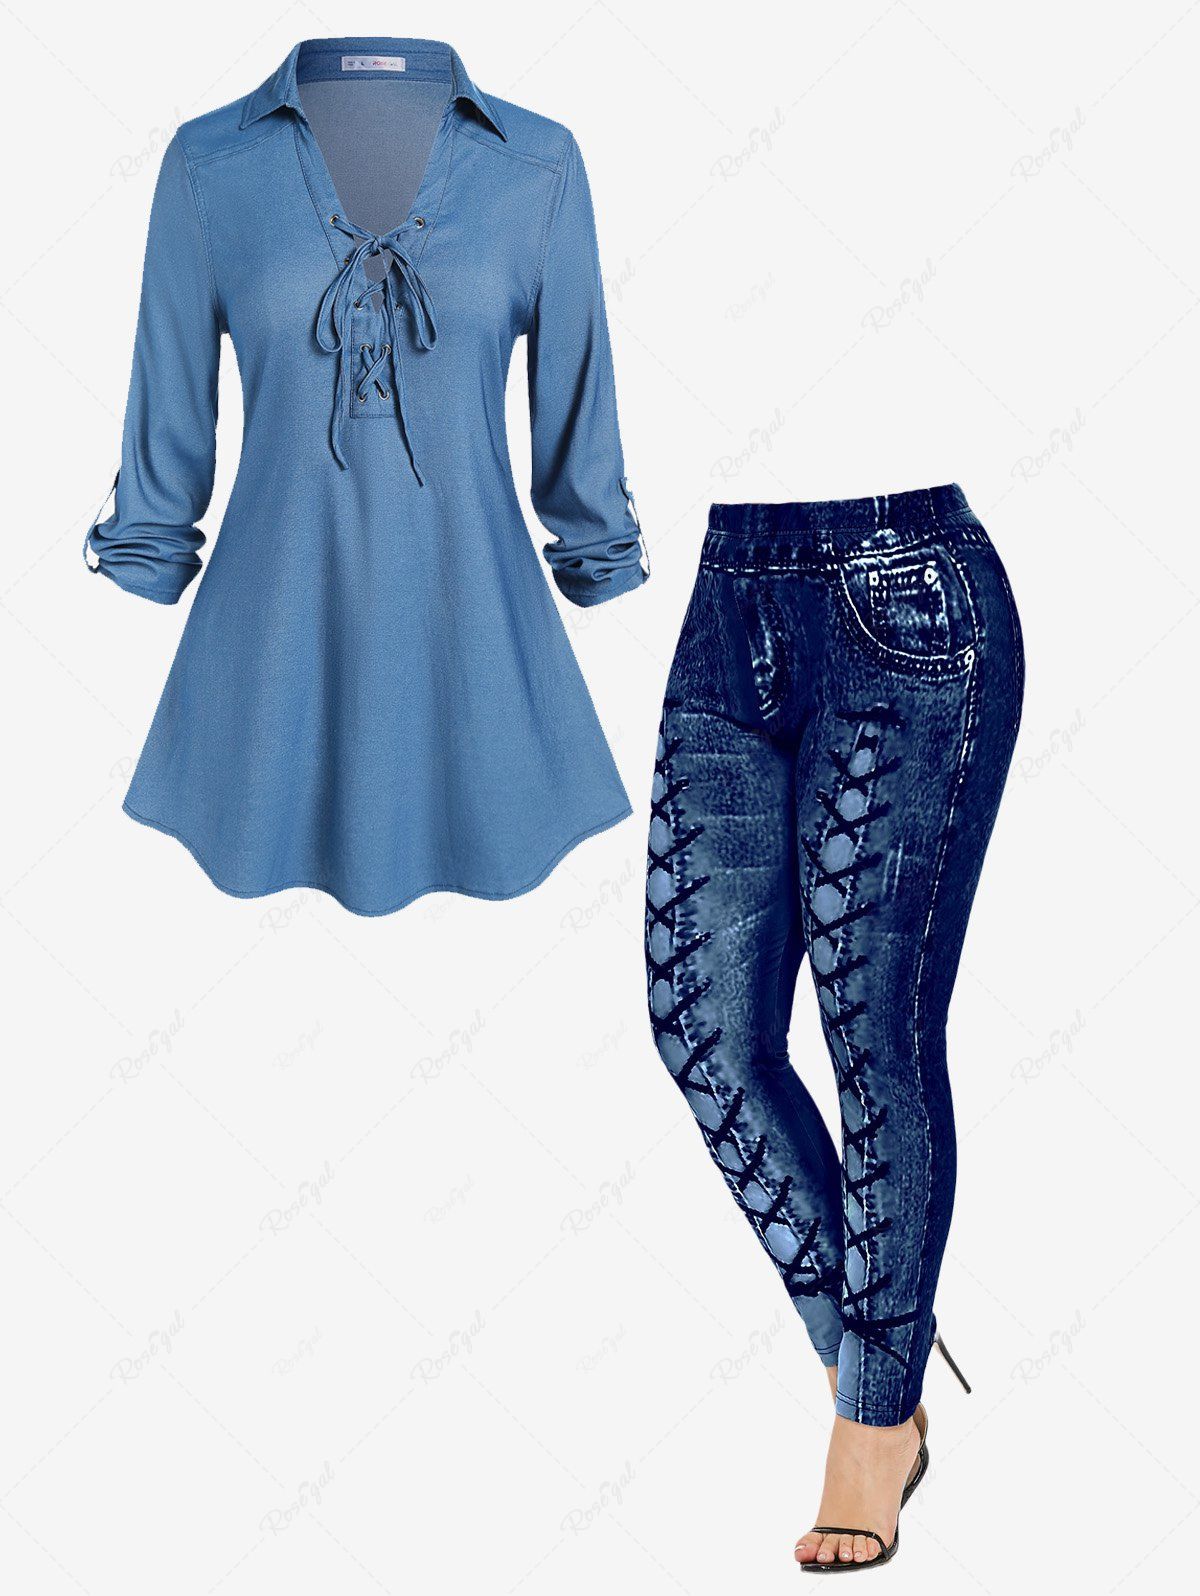 Discount Lace Up Roll Tab Sleeves Long Sleeves Tee and 3D Printed Leggings Plus Size Outfit  